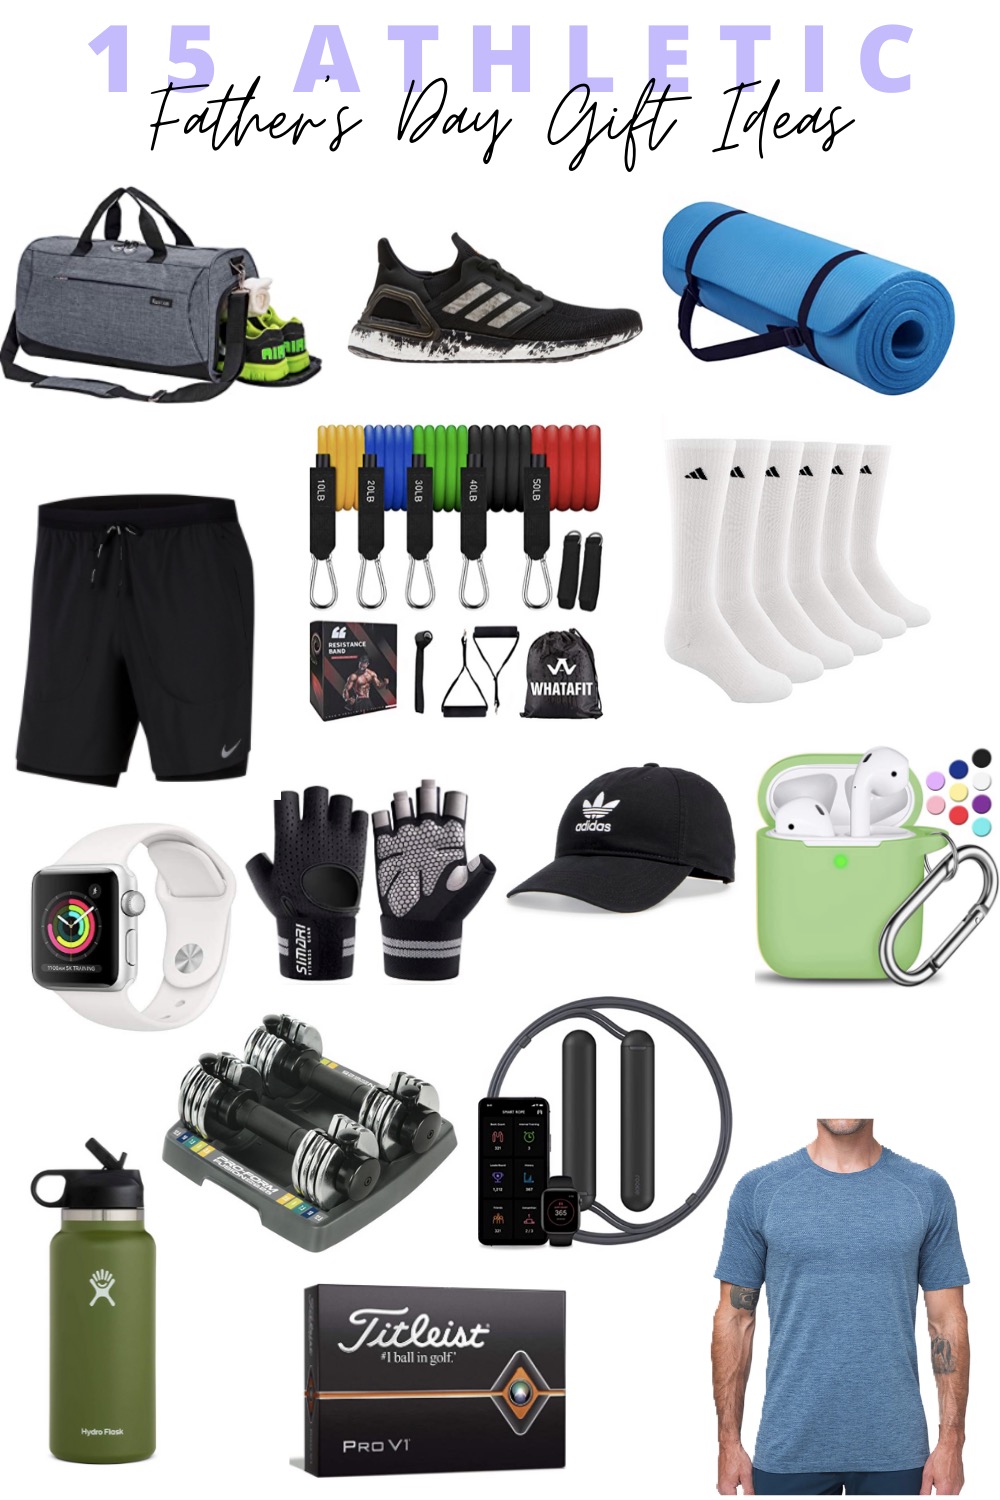 5 Gym Gifts for Dad